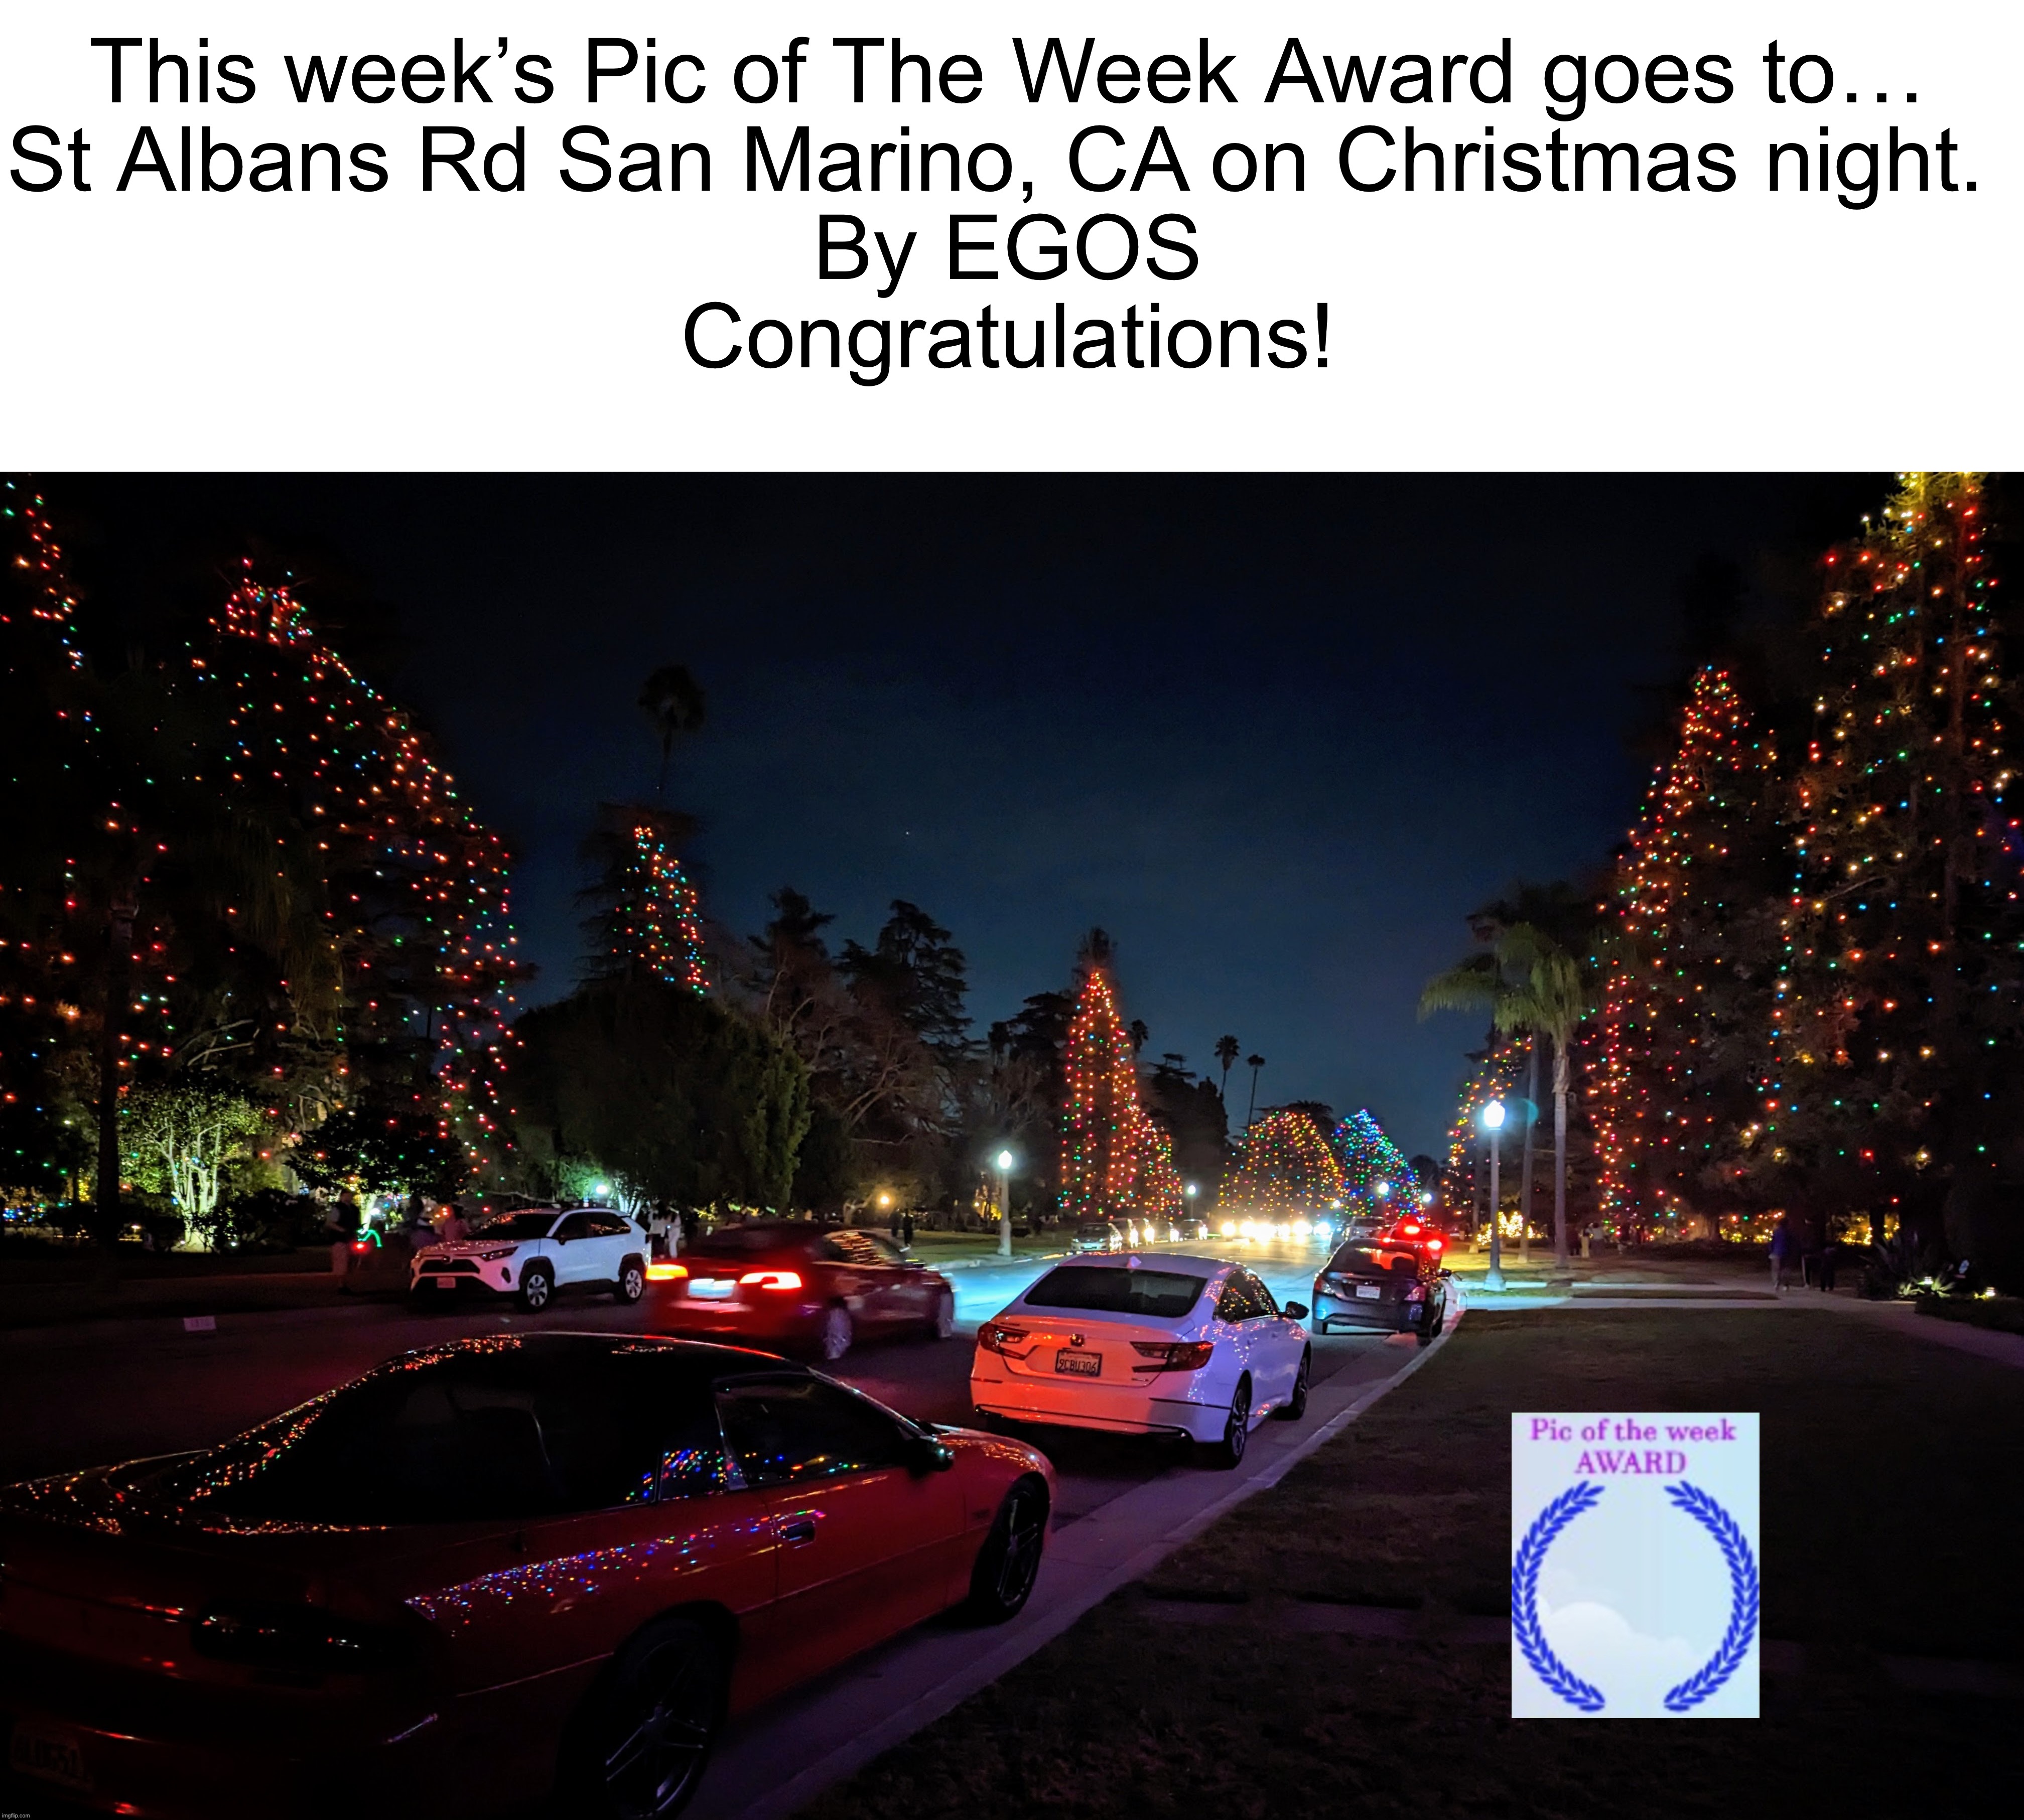 St Albans Rd San Marino, CA on Christmas night by @EGOS — https://imgflip.com/i/75r9s2 | This week’s Pic of The Week Award goes to…
St Albans Rd San Marino, CA on Christmas night. 
By EGOS
Congratulations! | image tagged in share your own photos | made w/ Imgflip meme maker